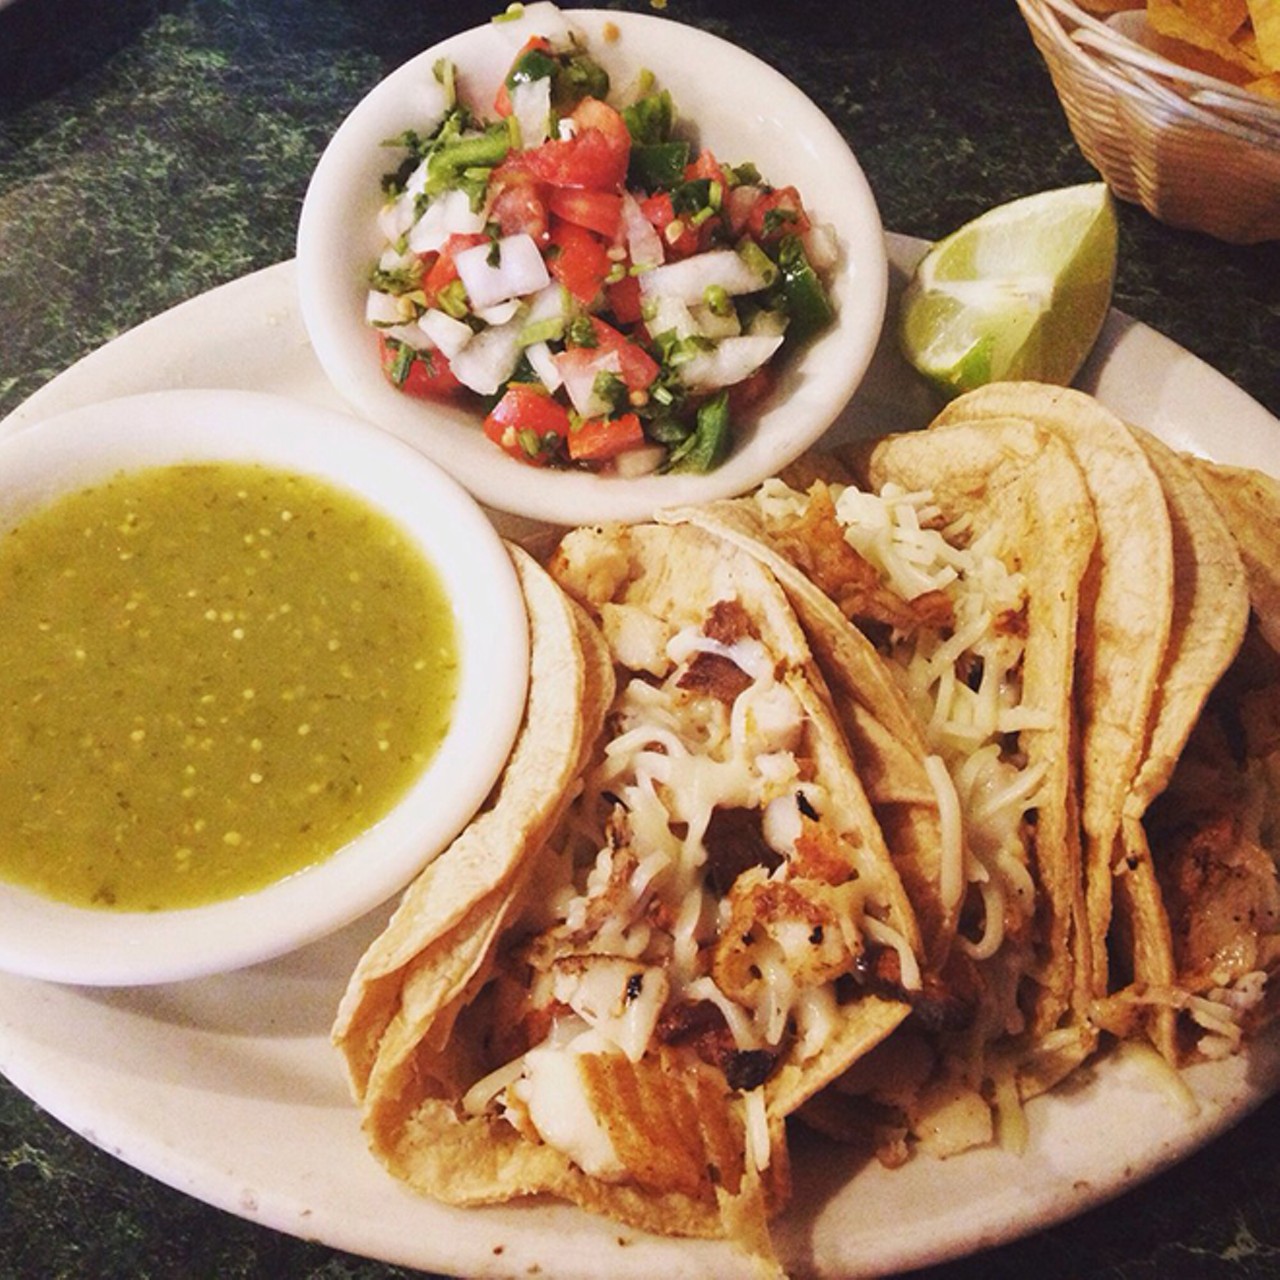 El Potro Mexican Restaurant
501 N. Orlando Ave., 407-975-9132
If you don't love fish tacos, we can't be friends. Pro-tip: Dip these babies in guac if you want to know what heaven tastes like.
Photo via Yelp